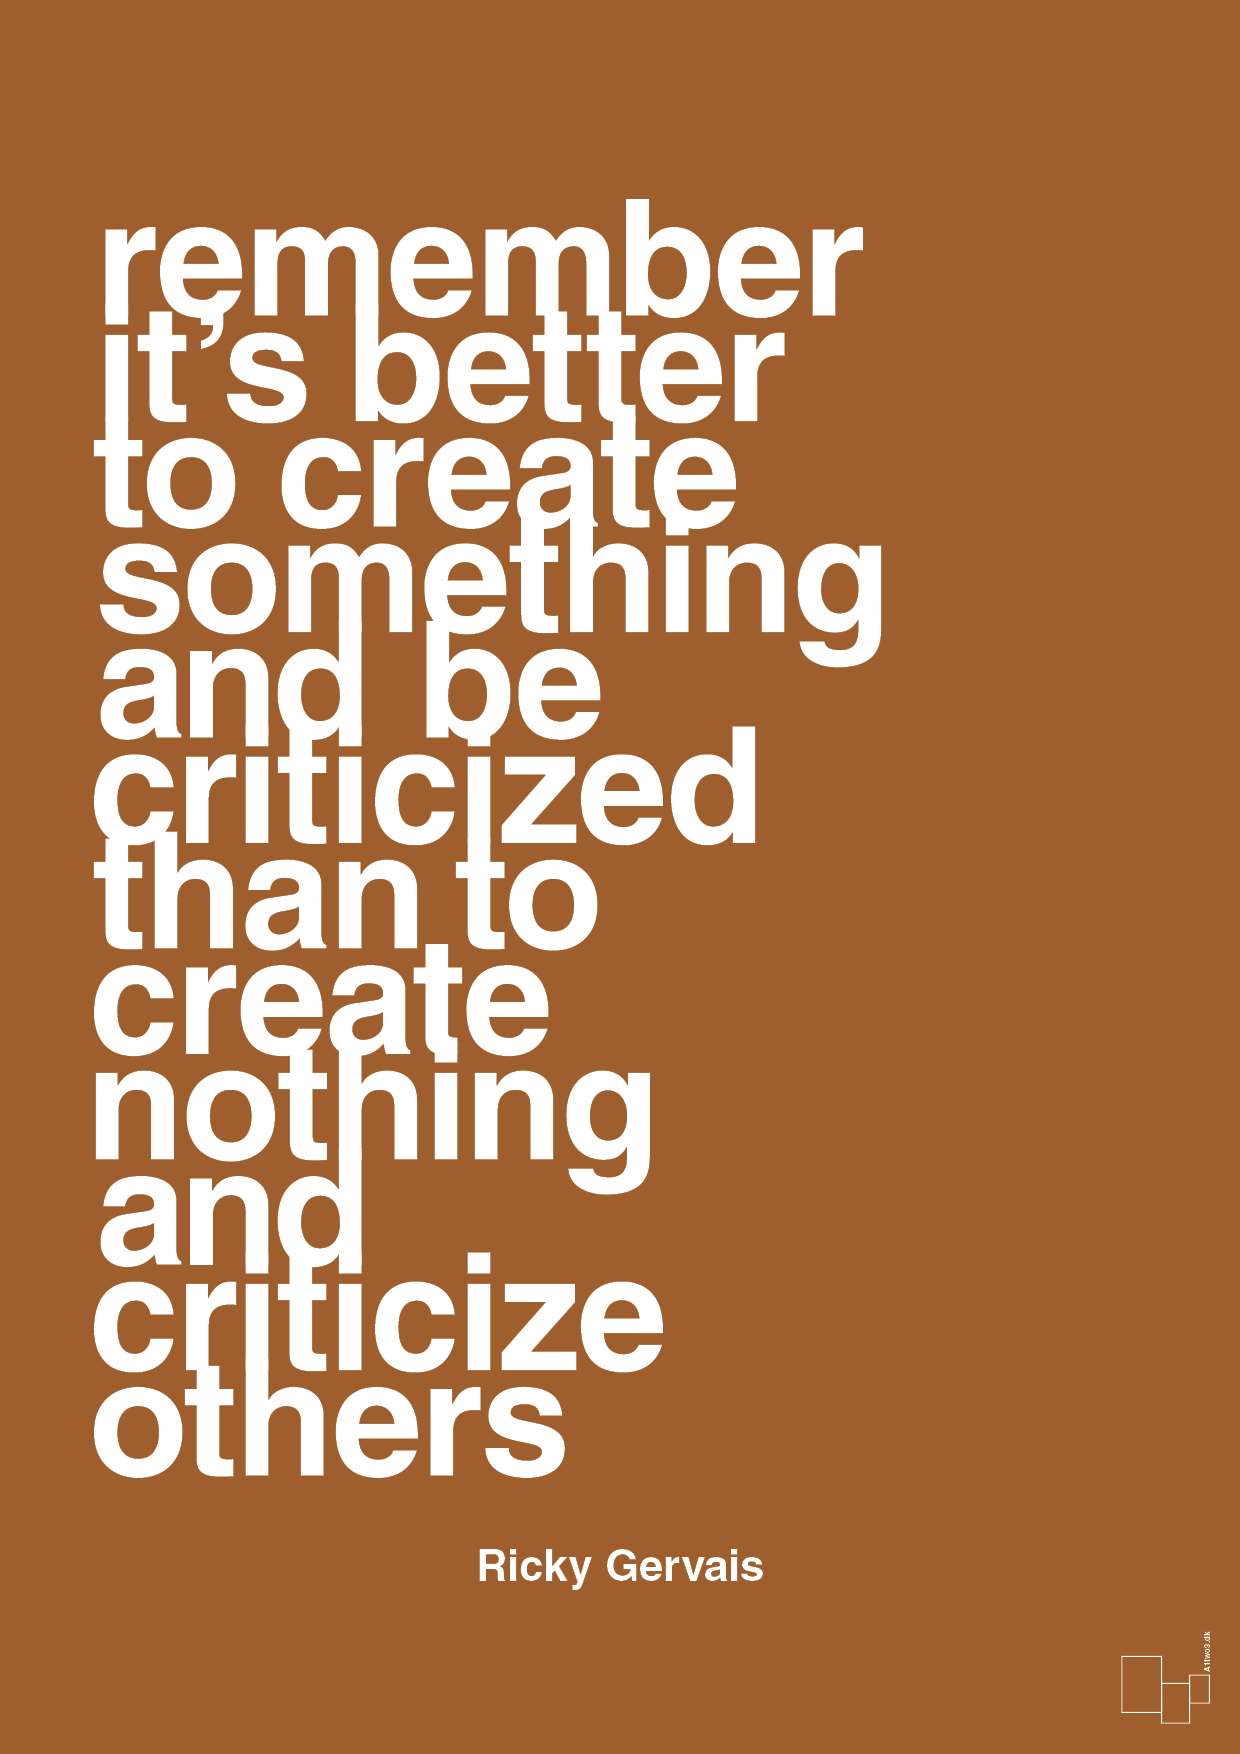 remember its better to create something and be criticized than create nothing and criticize others - Plakat med Citater i Cognac